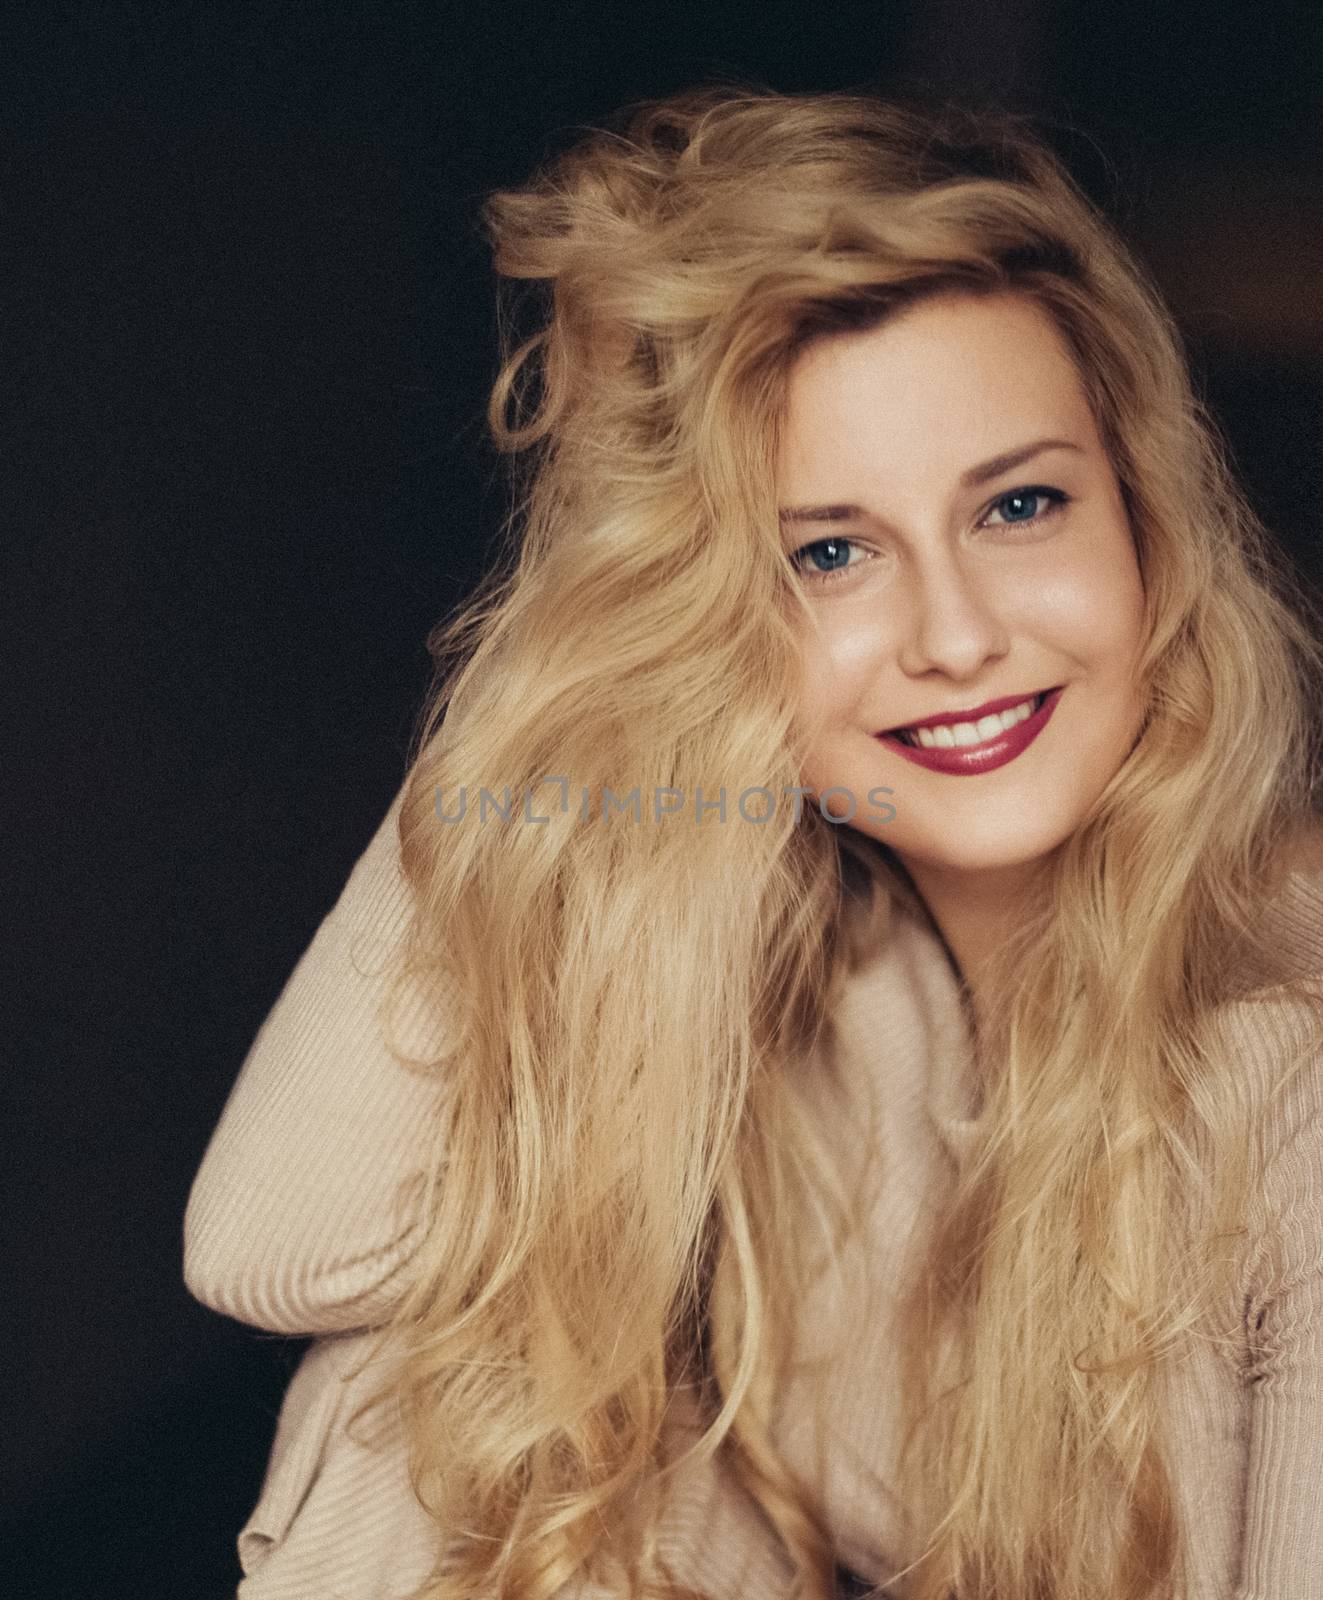 Beautiful woman smiling, long blonde hairstyle and natural makeup look, beauty and 90s style fashion brand campaign